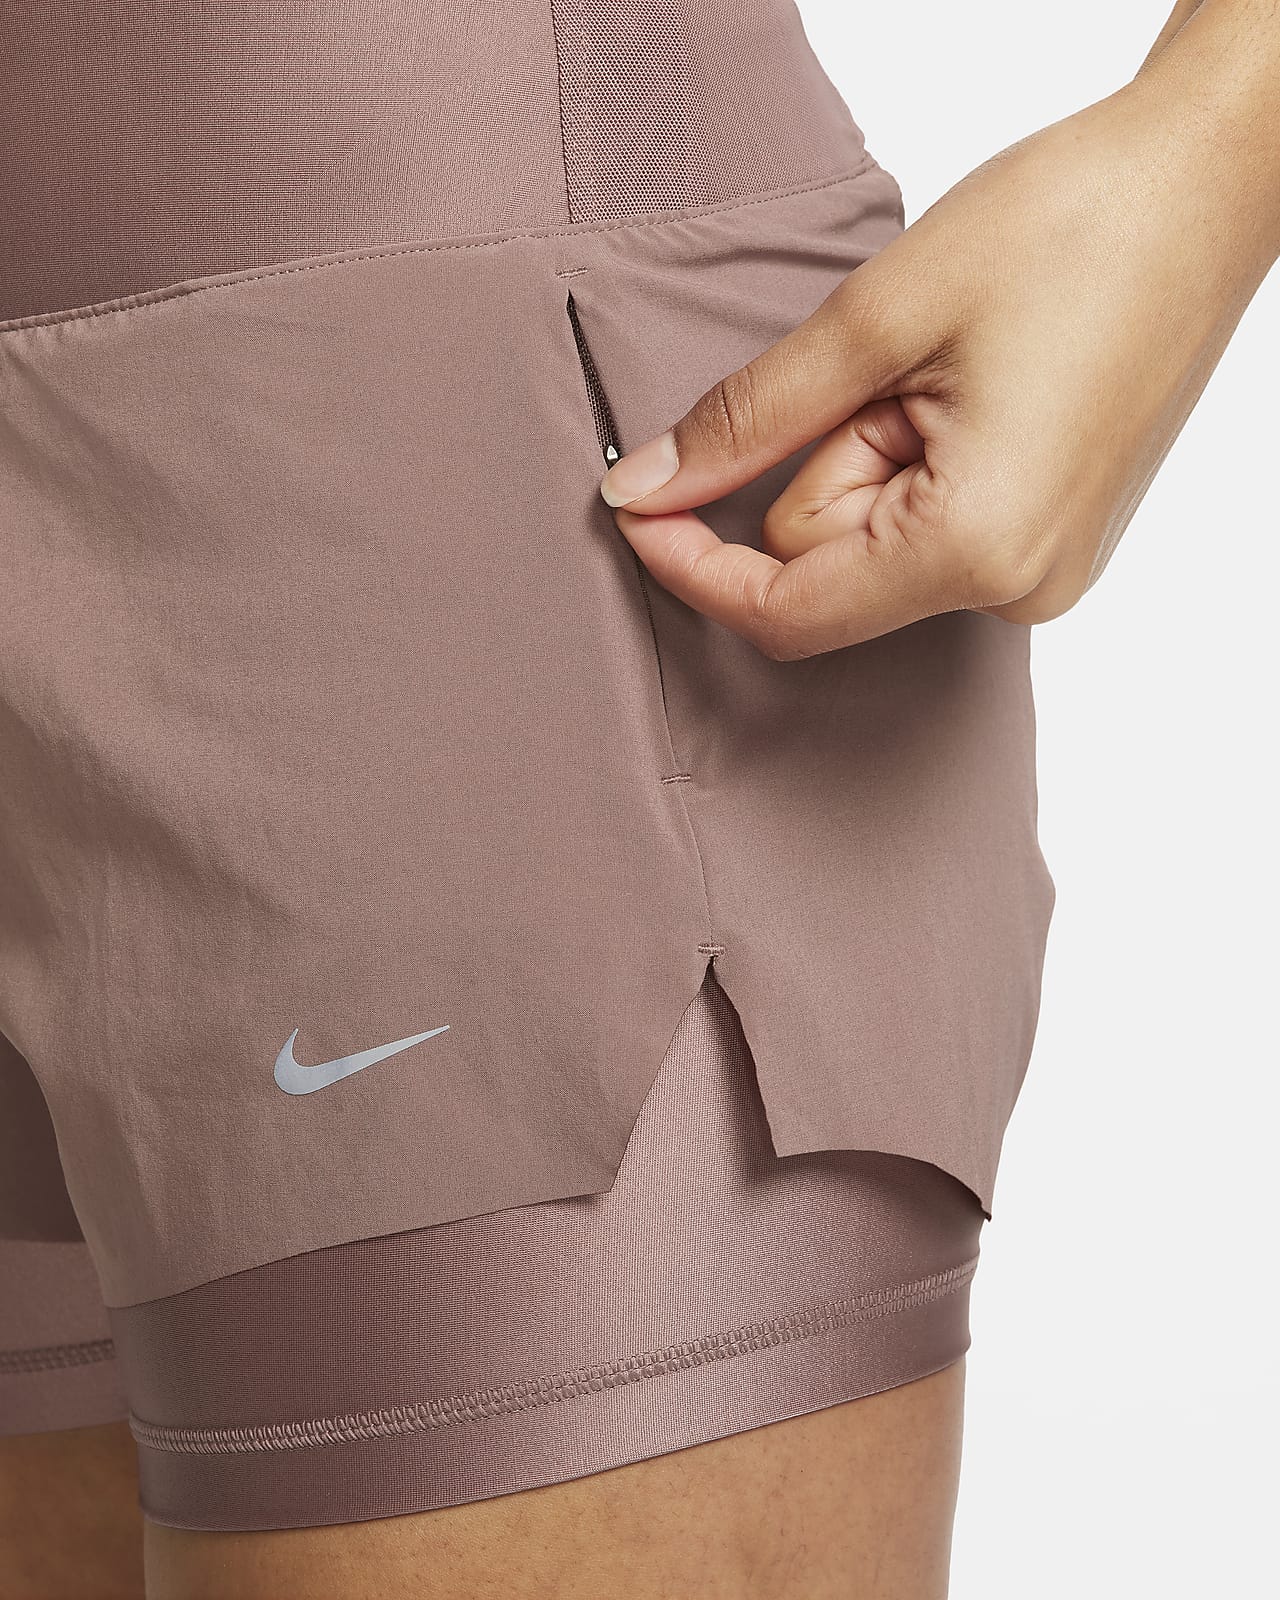 Nike Dri-FIT Swift Women's Mid-Rise 3 2-in-1 Running Shorts with Pockets.